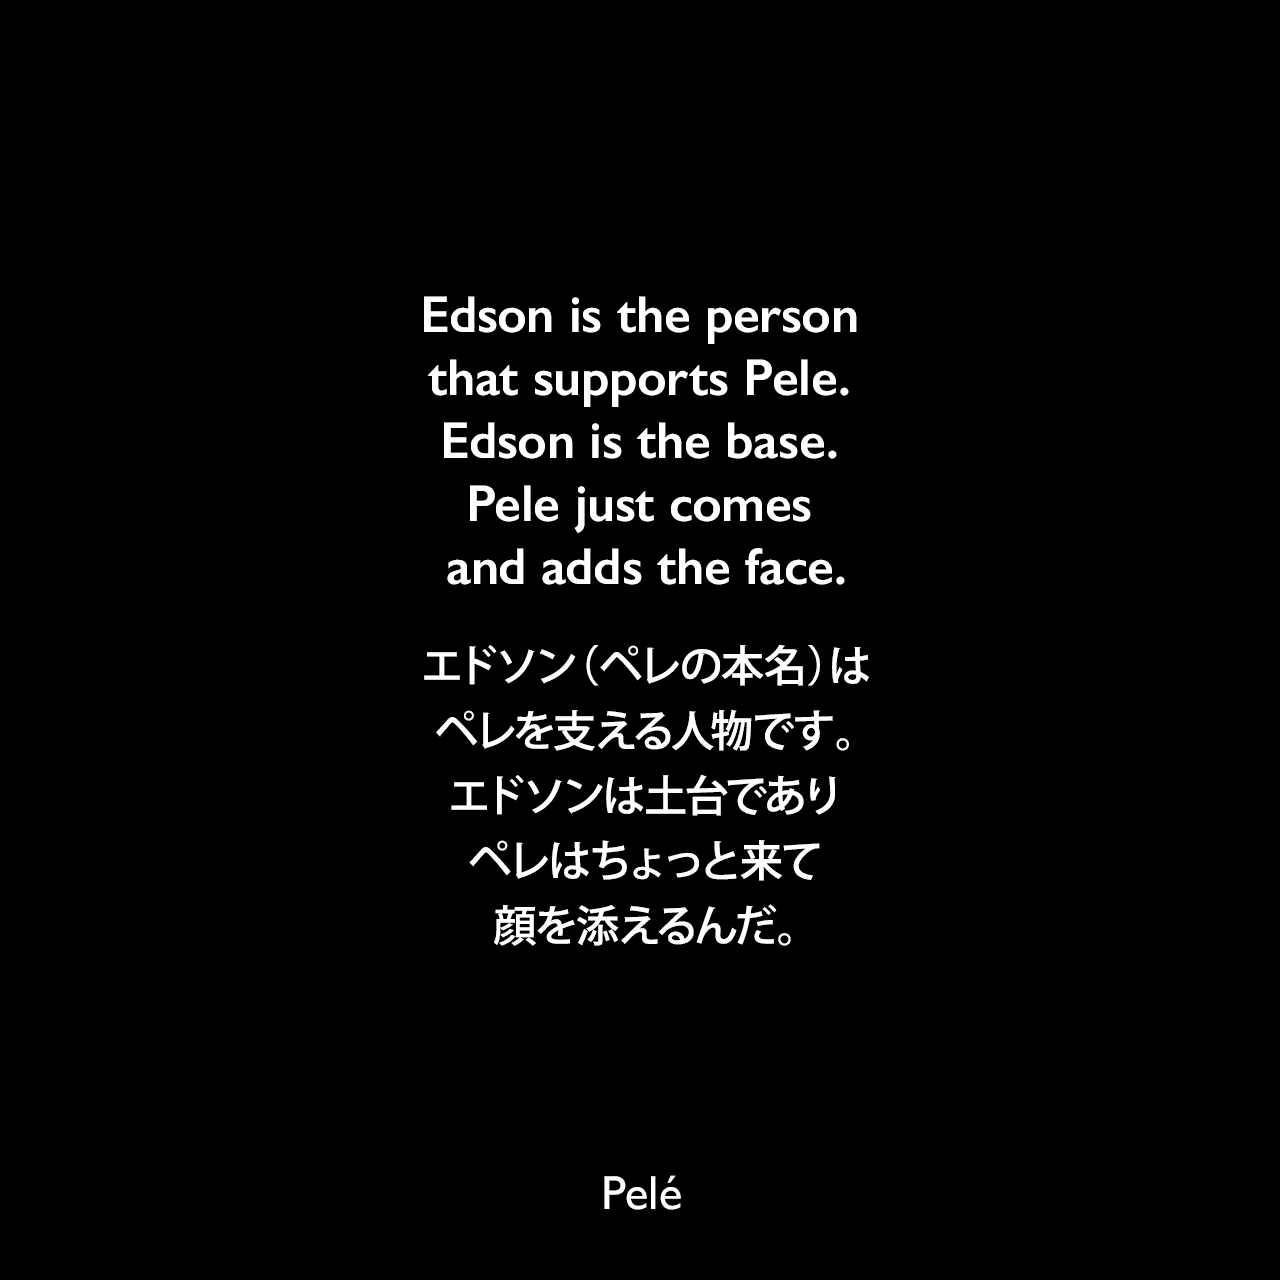 Edson is the person that supports Pele. Edson is the base. Pele just comes and adds the face.エドソン（ペレの本名）は、ペレを支える人物です。エドソンは土台であり、ペレはちょっと来て、顔を添えるんだ。Pelé